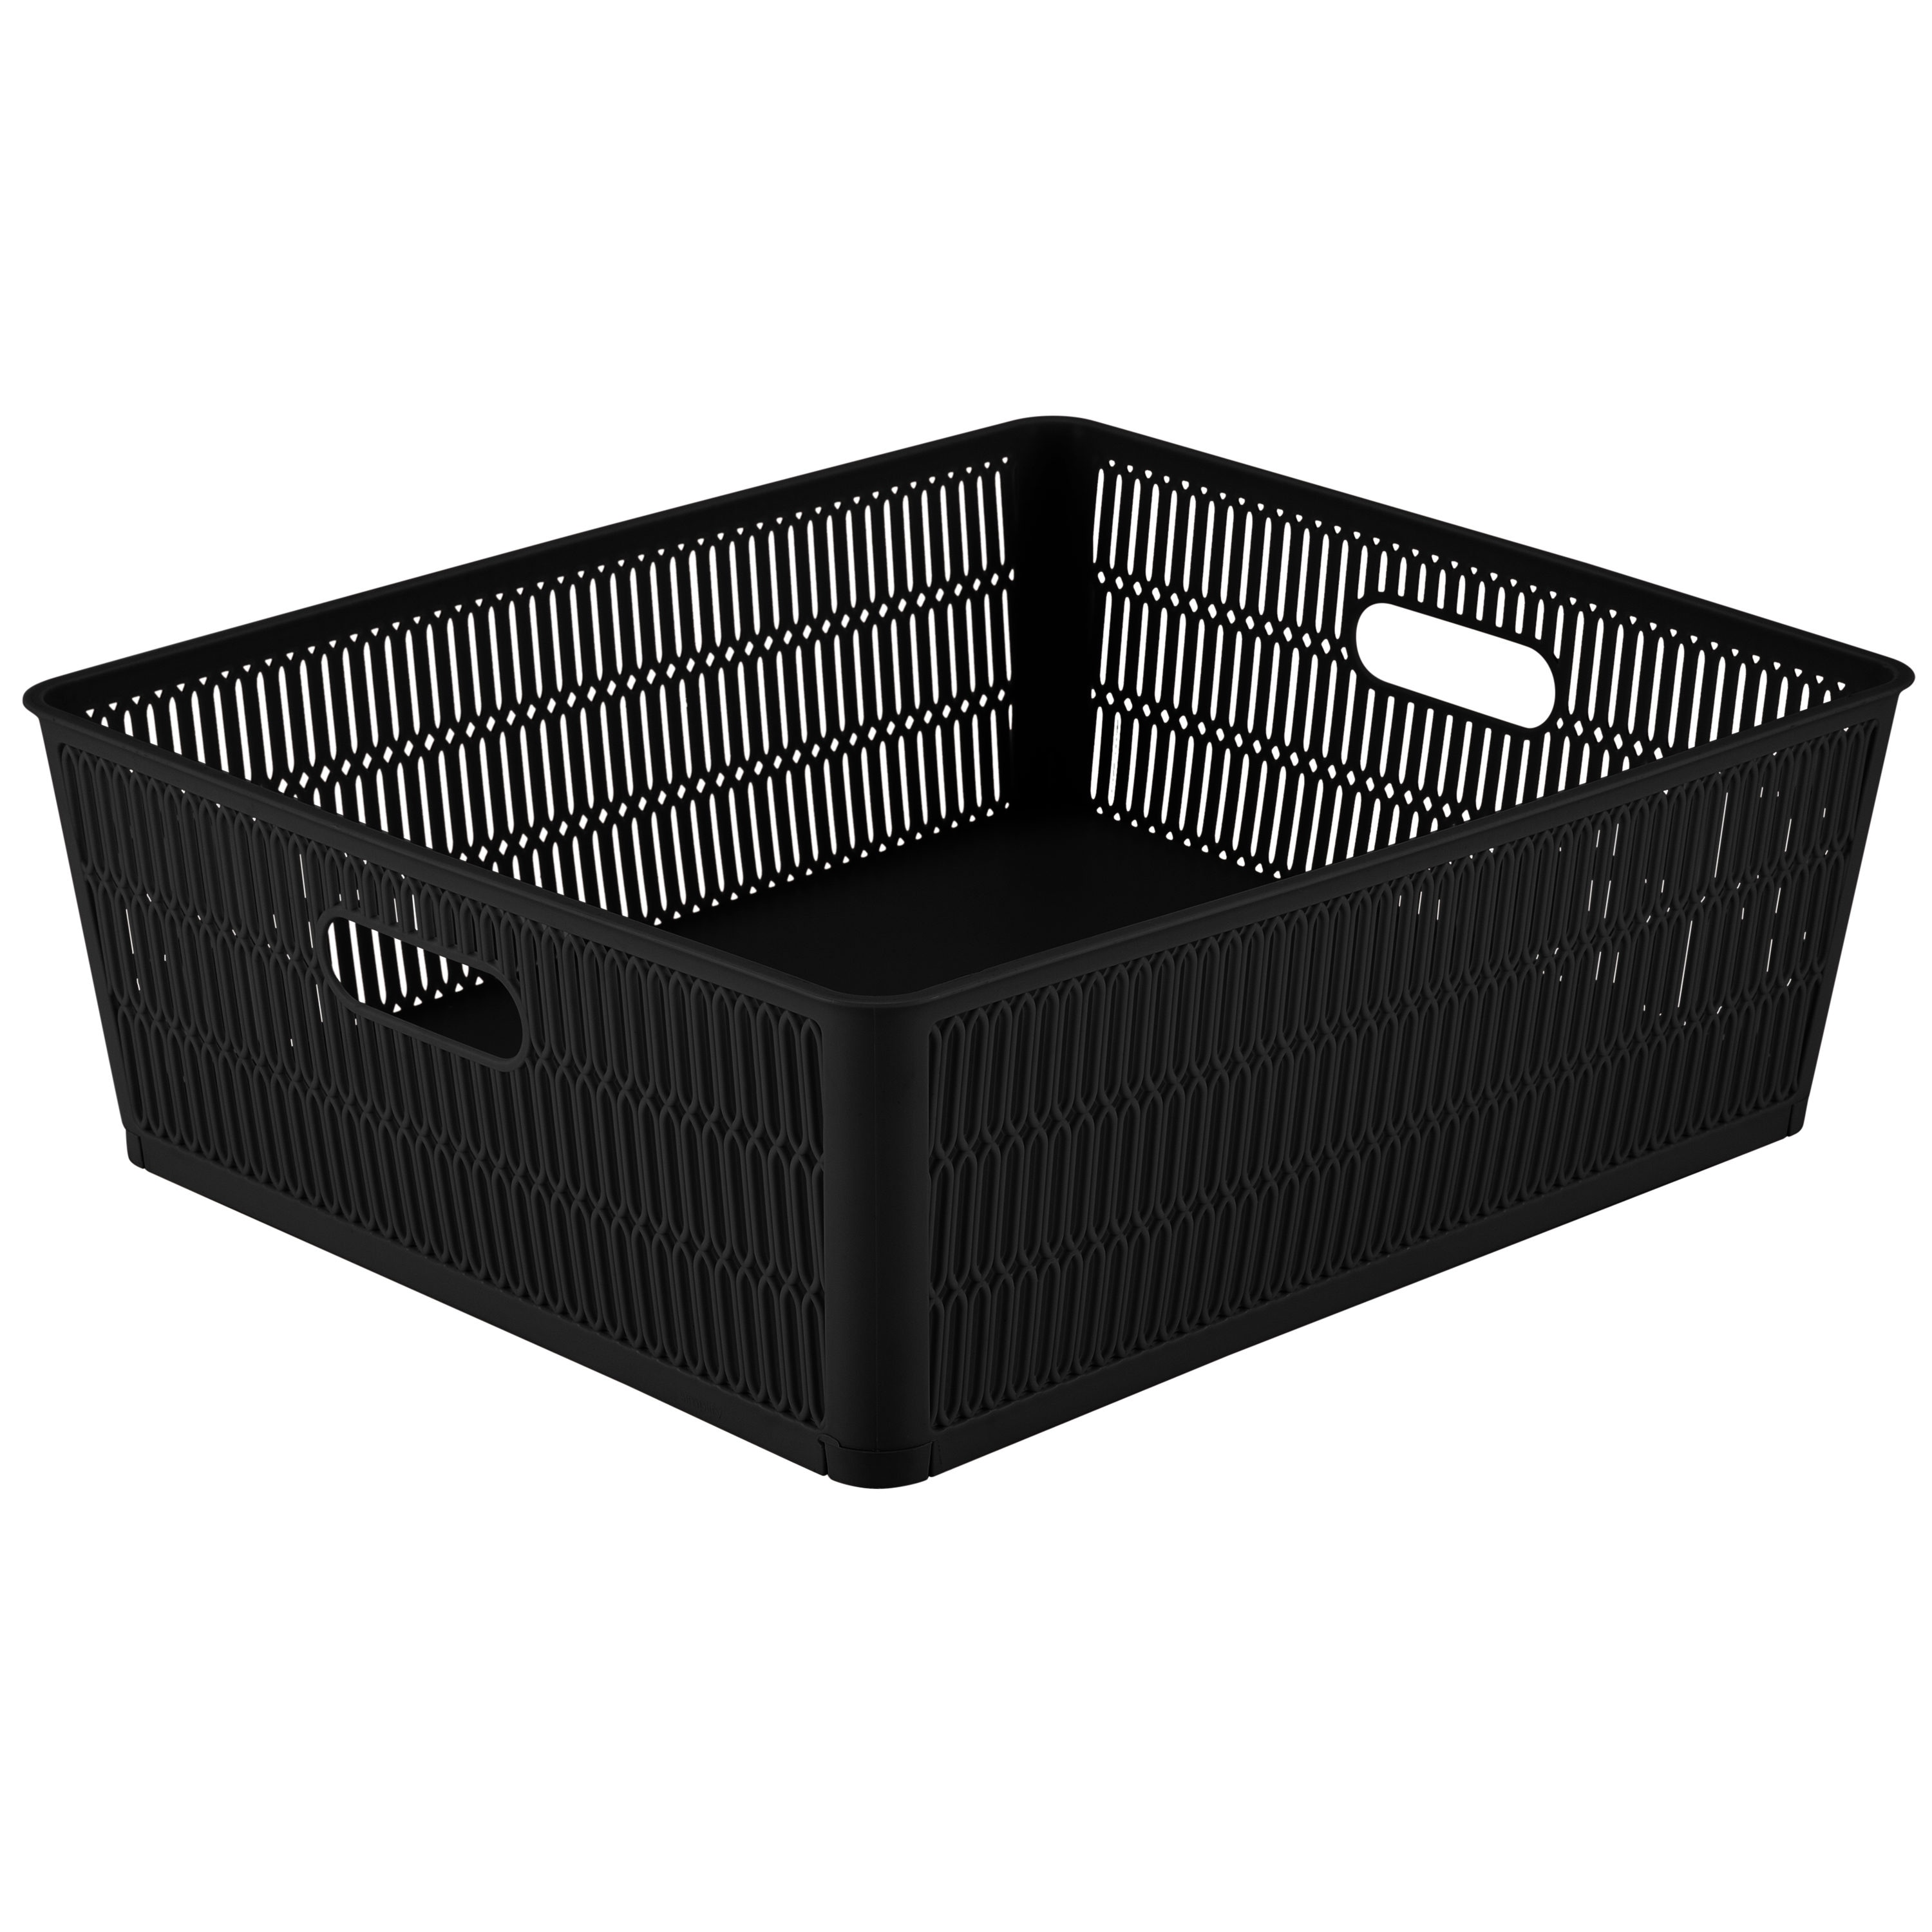 Simplify 2 Pack Slide 2 Stack It Plastic Shallow Storage Baskets, White 